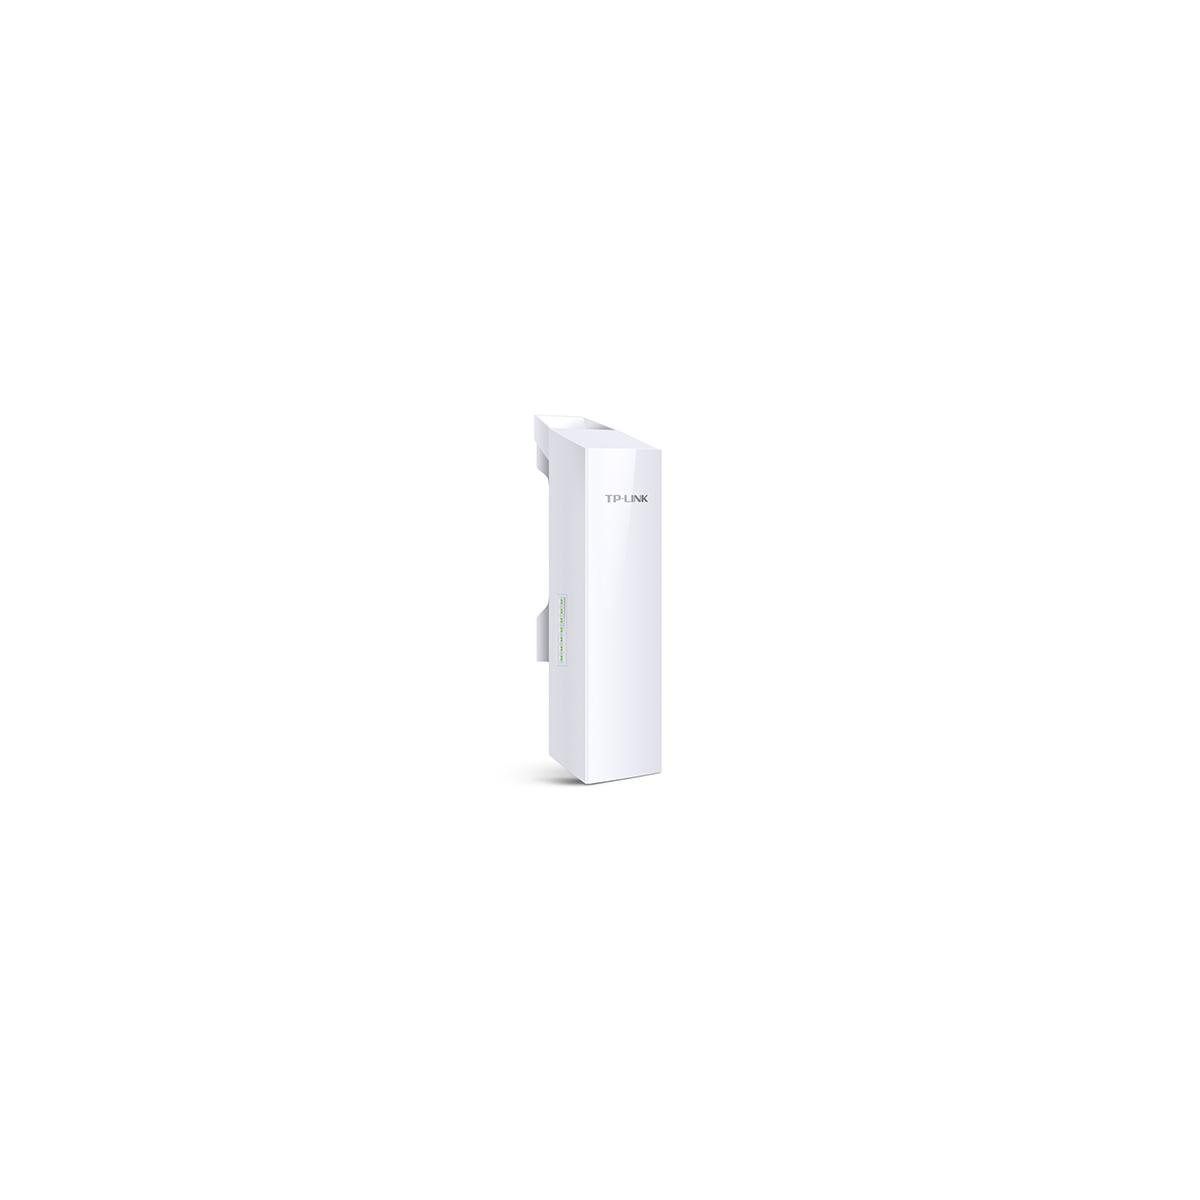 Mbit/s Access Point Access Point TP-LINK Outdoor 300 Wireless CPE510 WLAN